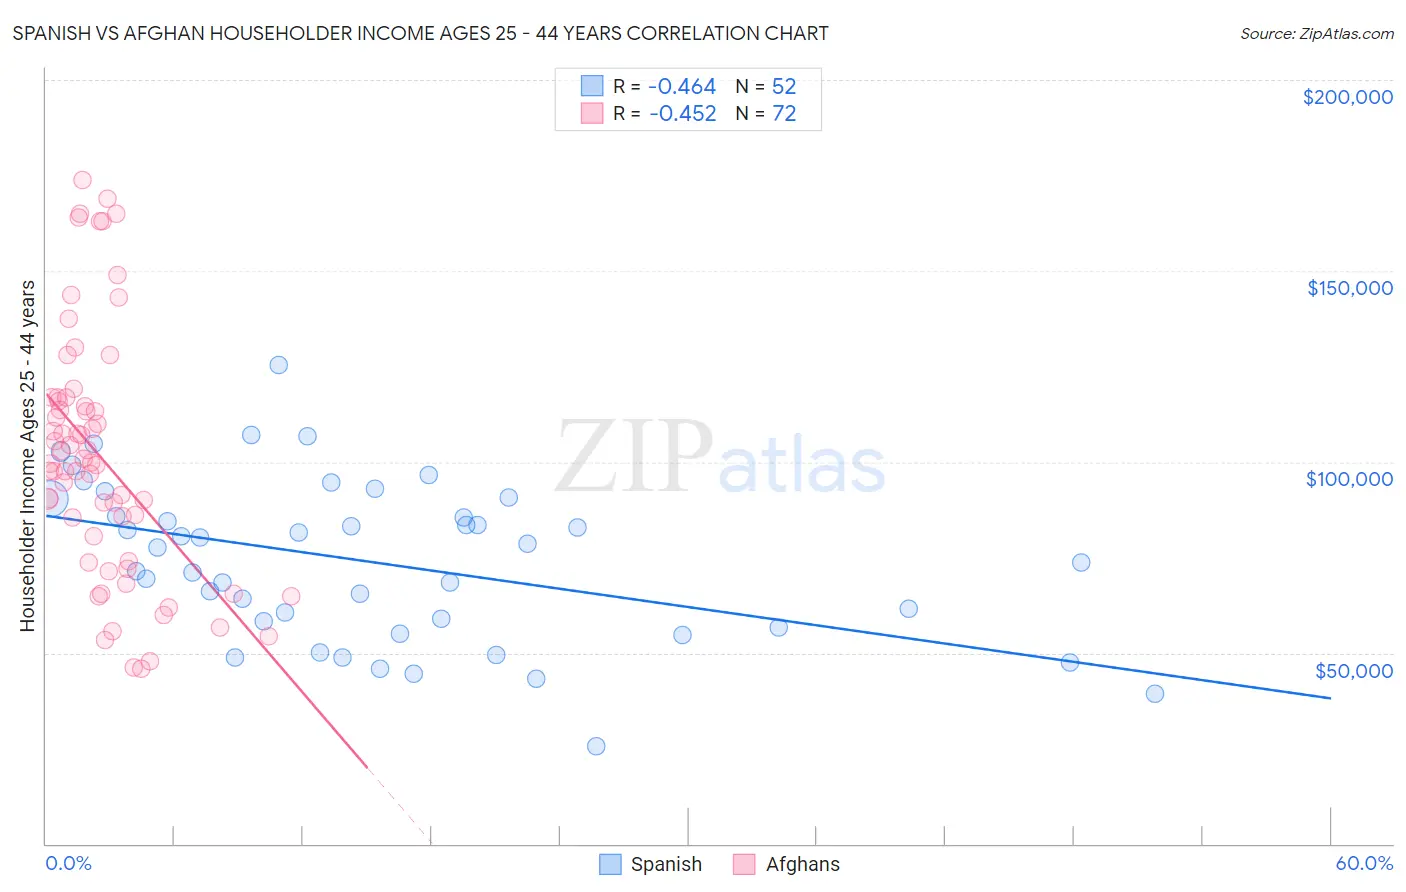 Spanish vs Afghan Householder Income Ages 25 - 44 years